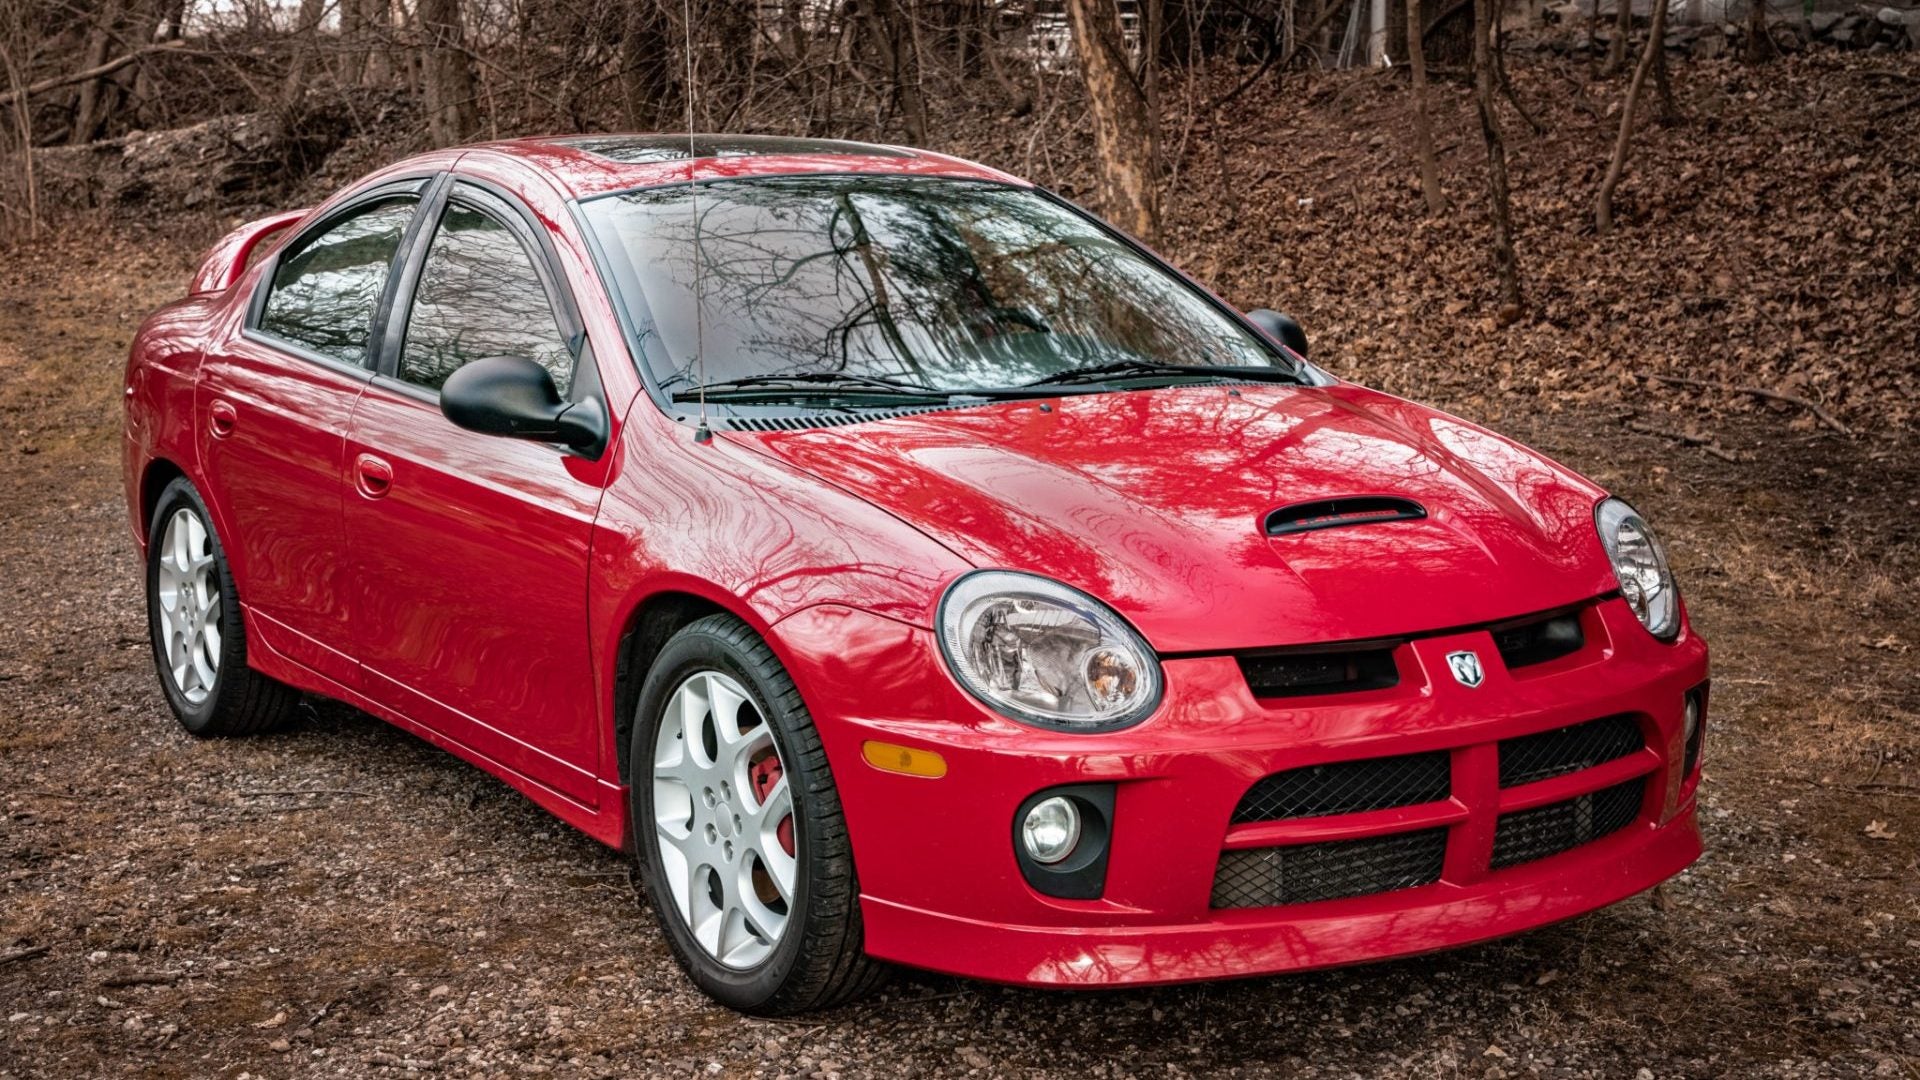 2005 Dodge Neon SRT-4 With 40K Miles Isn't Just for Speeding Teenagers